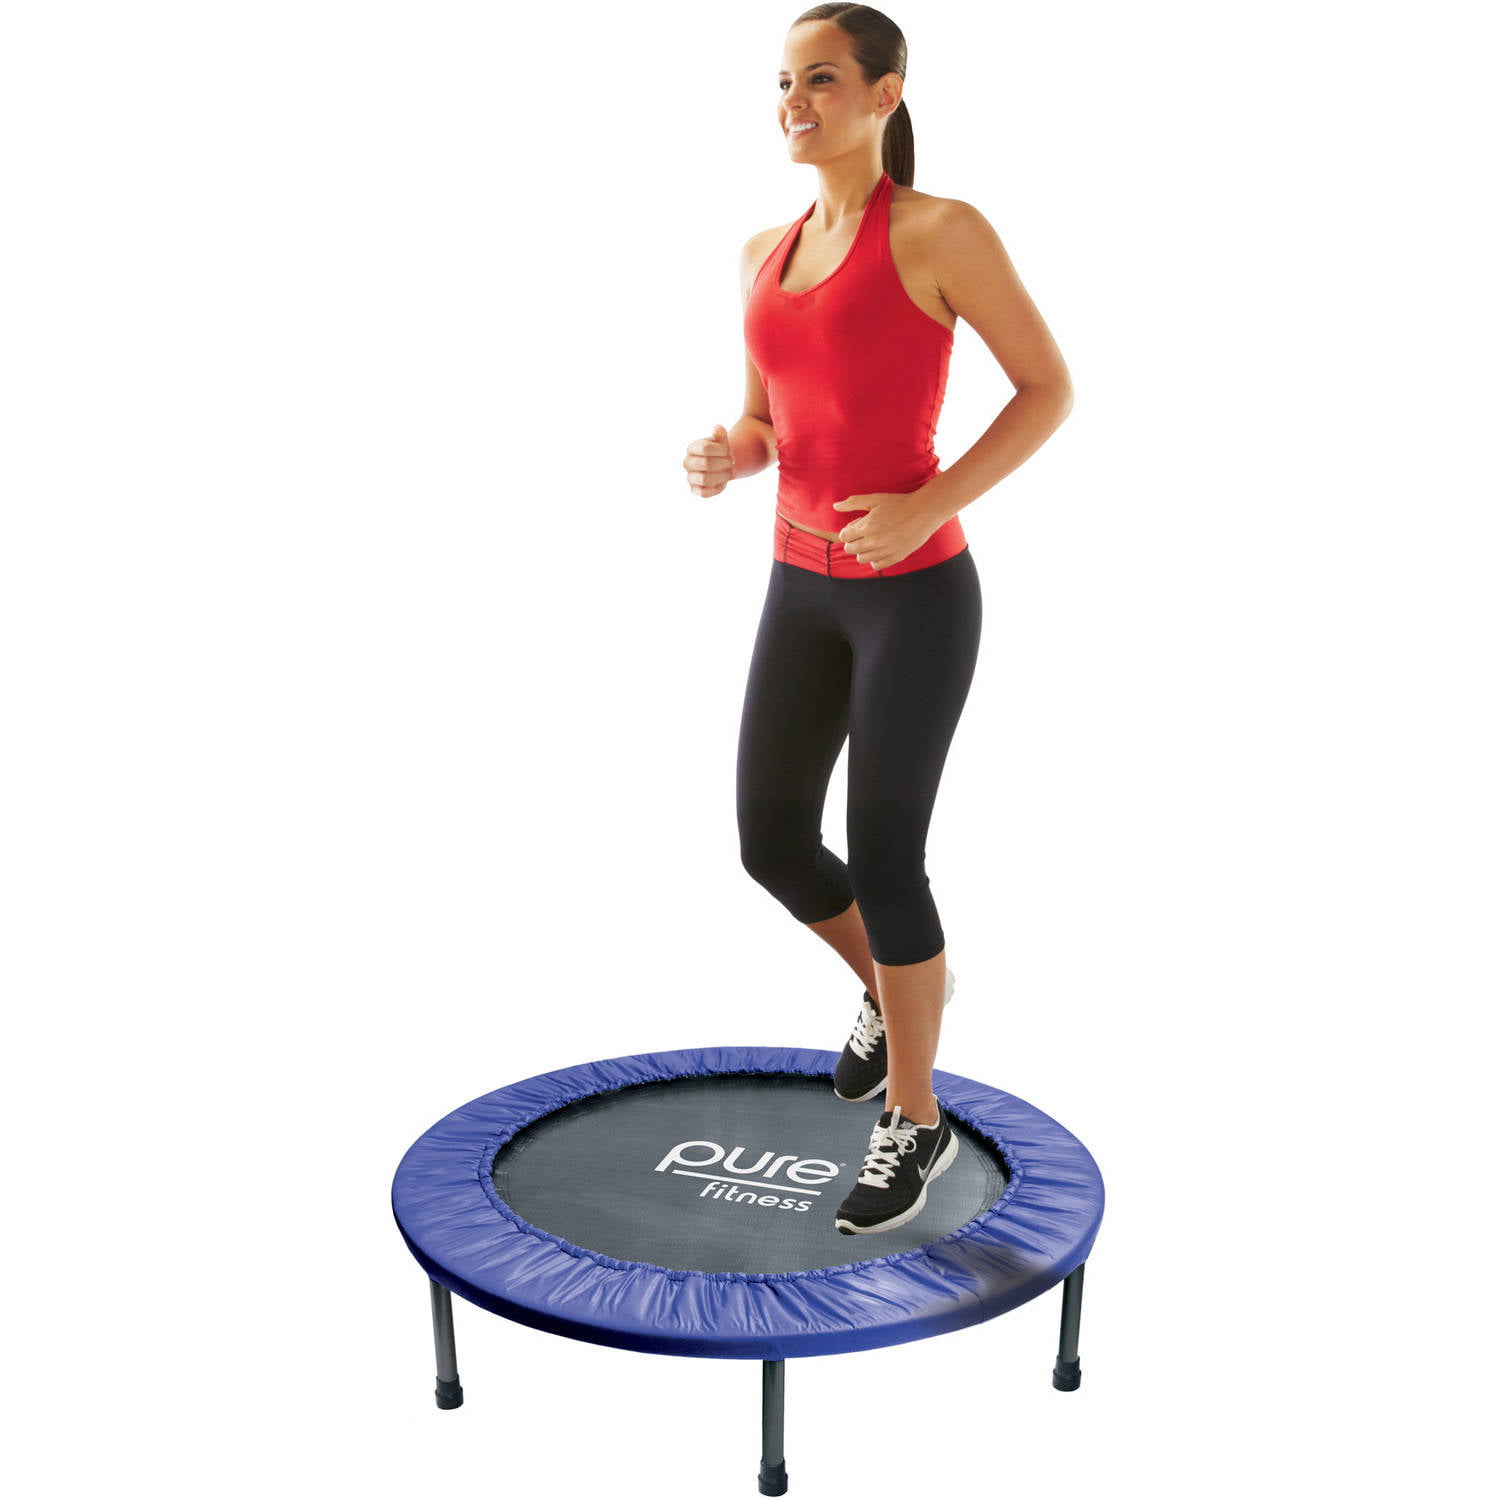 SogesPower Mini Fitness Trampoline Folding Trampoline for Home Exercise 28 inches with Handle bar 